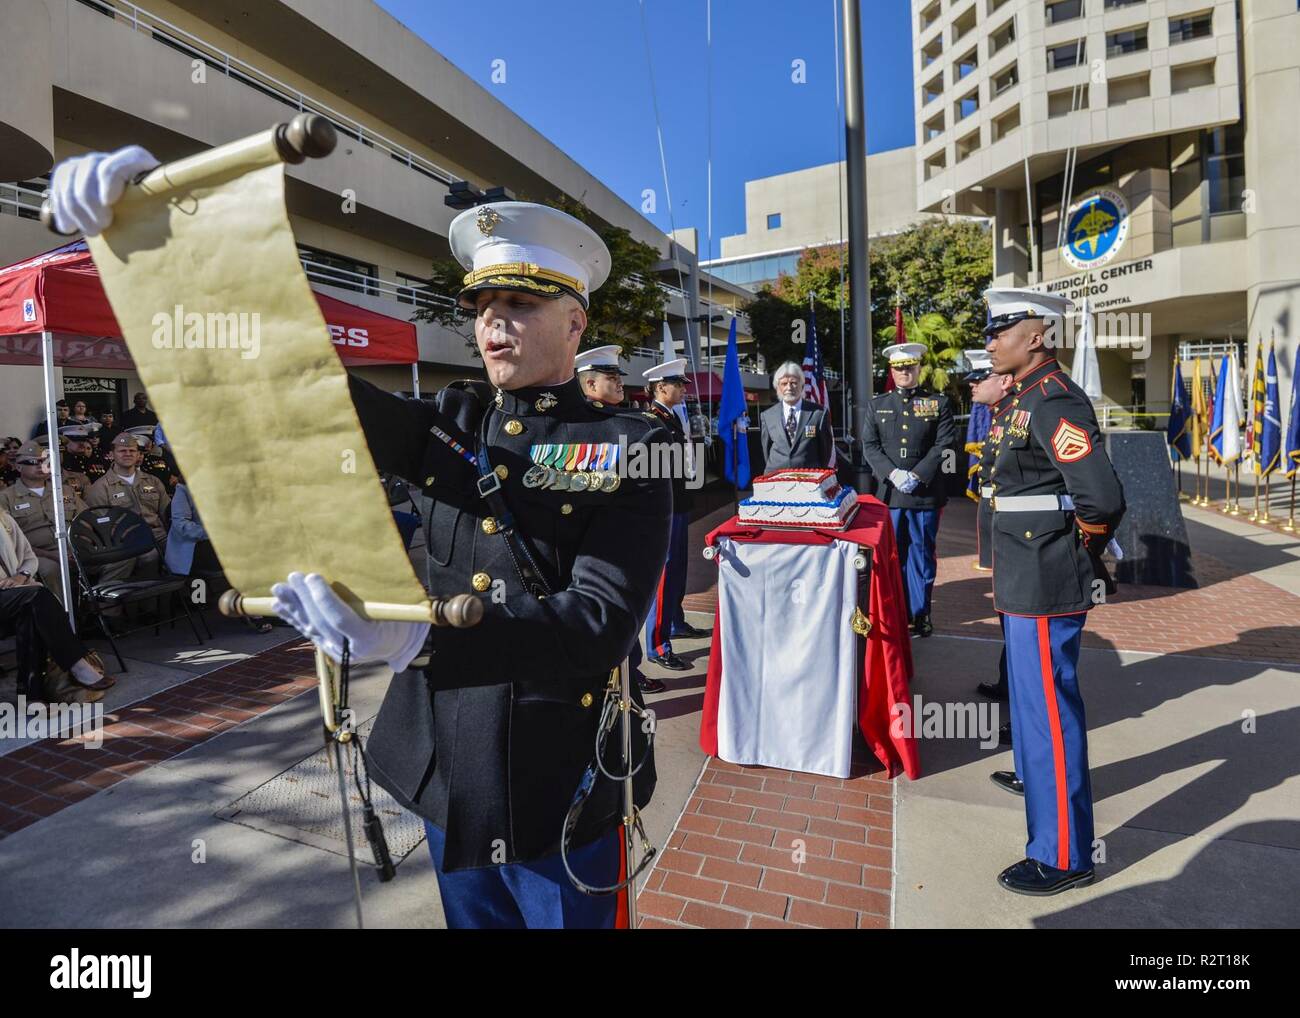 SAN DIEIGO (Nov. 09,2018) — Major Christopher Whelan, executive officer of the Wounded Warrior Battalion at Naval Medical Center San Diego (NMCSD) reads the traditional General John Lejeune’s Marine Corps birthday message, at a celebration of the 243rd Marine Corps Birthday.  NMCSD is the largest naval hospital on the west coast, employing more than 6,000 Sailors, Marines, civilians and contractors. Stock Photo